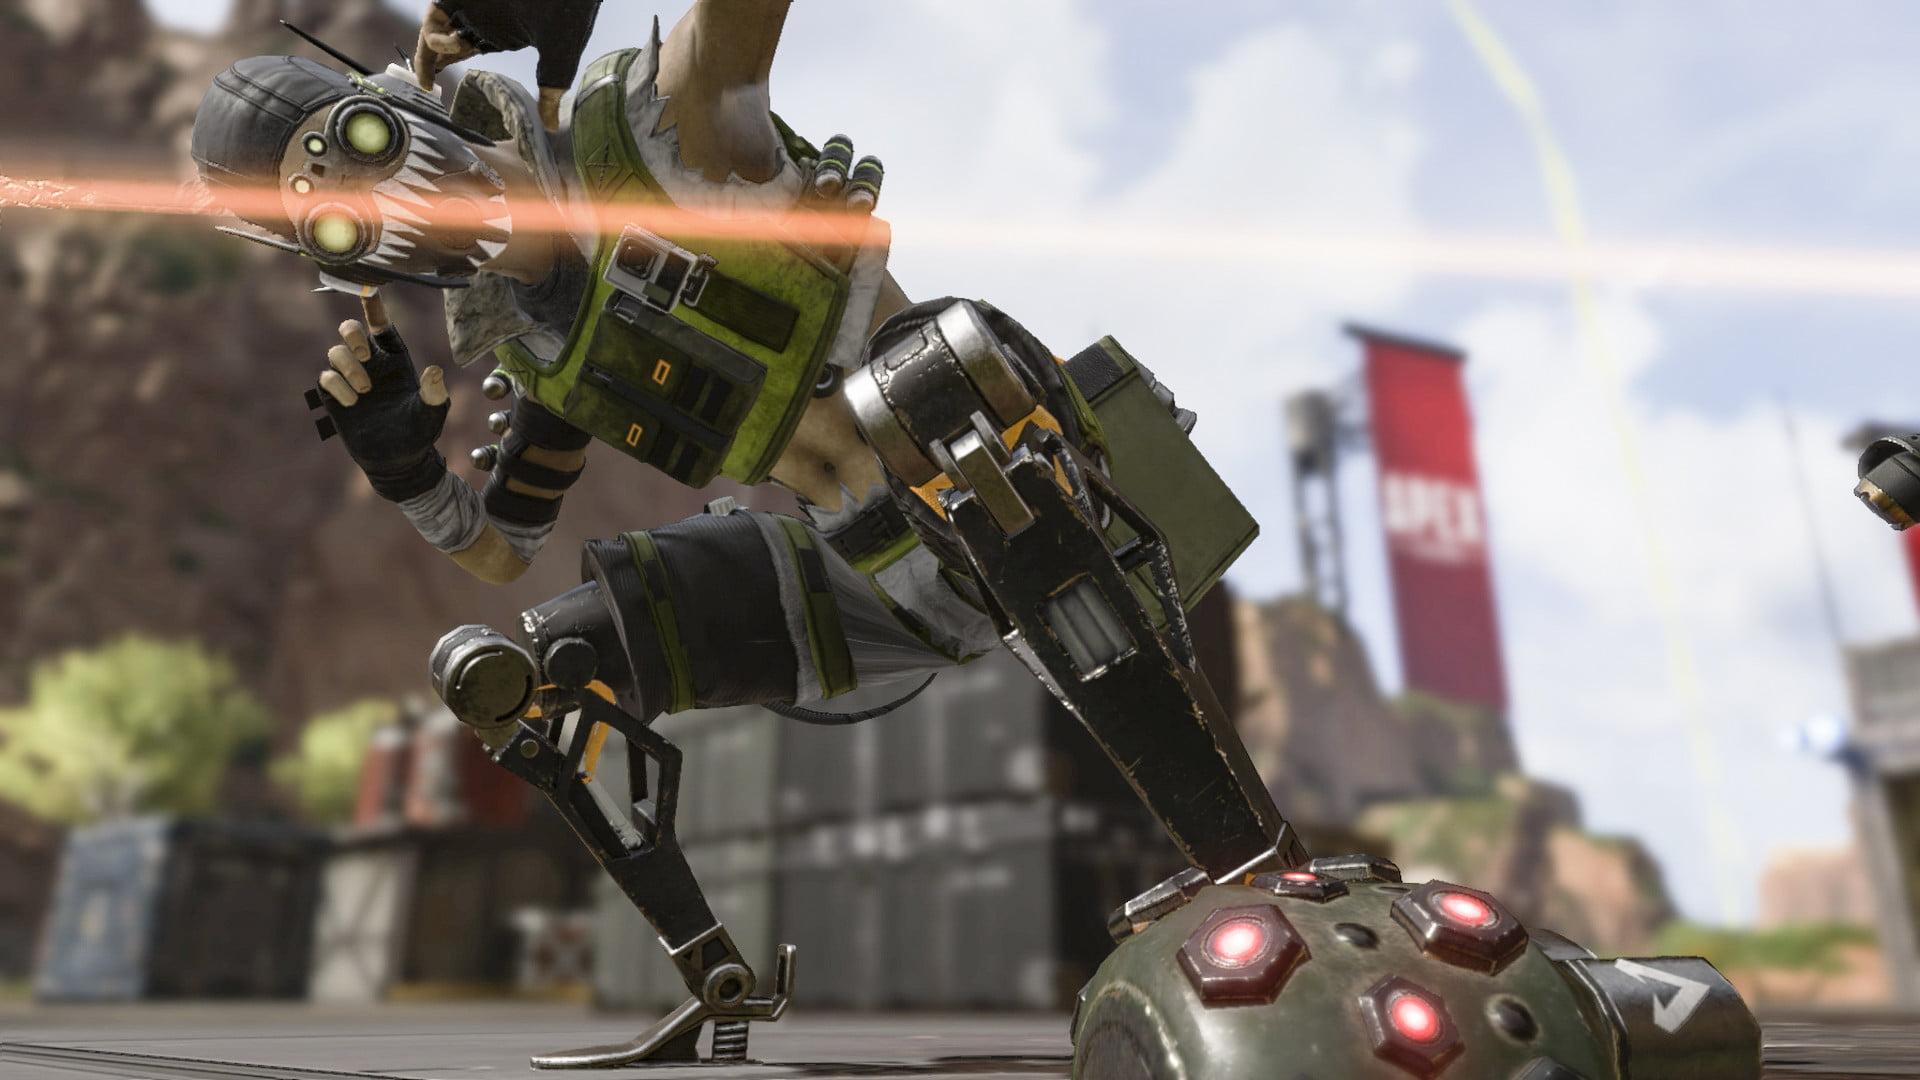 Apex Legends Octane Guide: How to Play, Abilities, and Lore